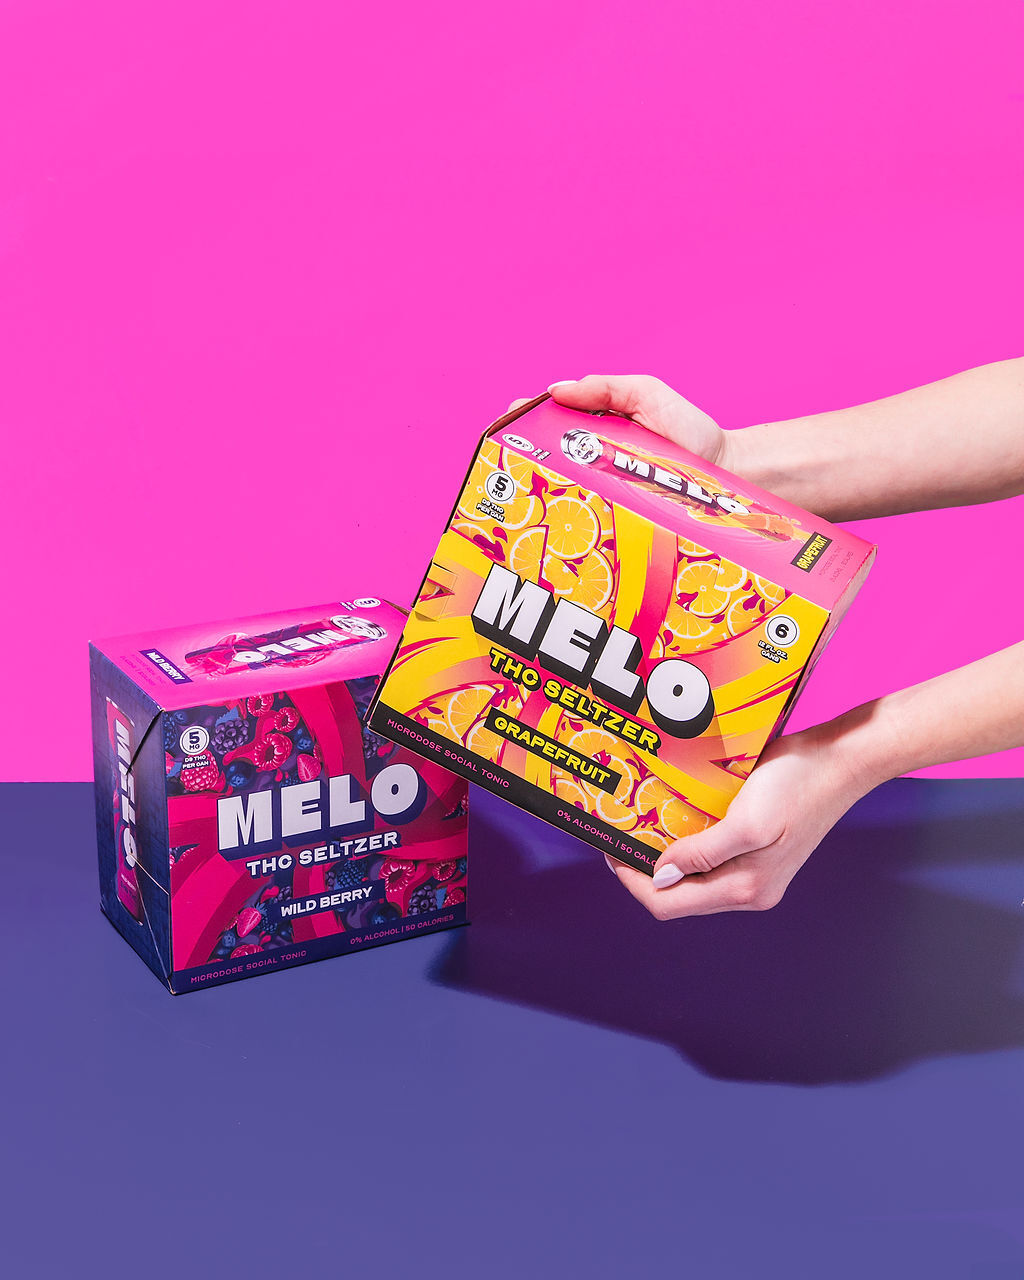 Melo THC Beverages Review: Refreshing Sips with a Mellow Twist